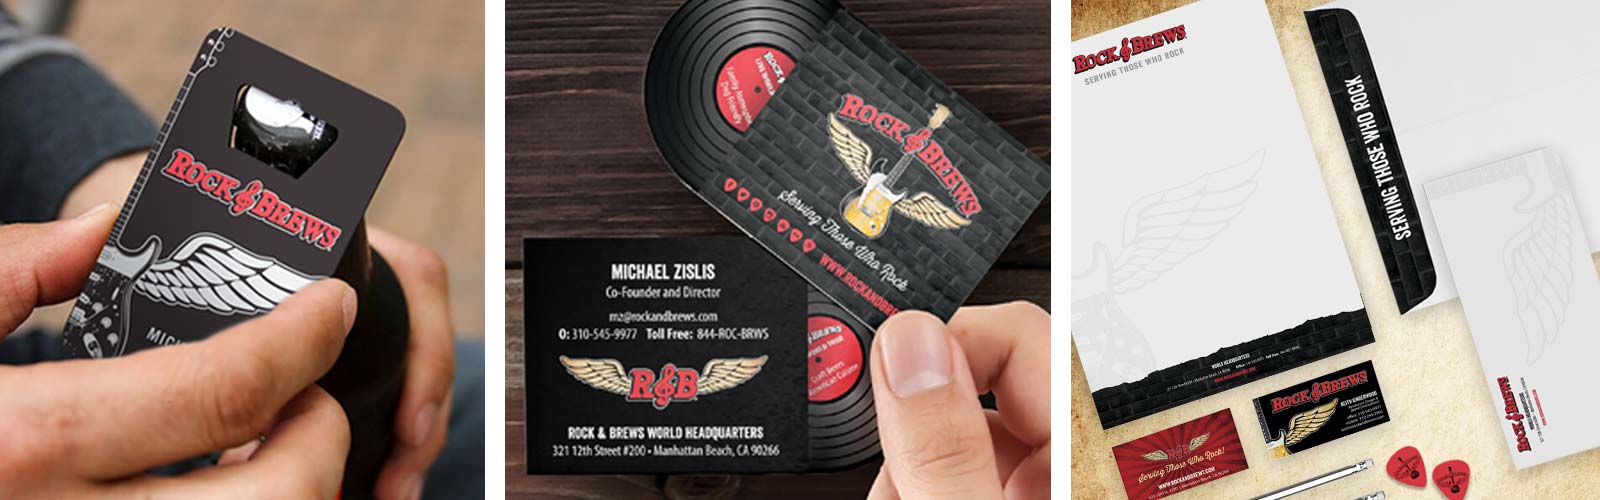 Rock & Brews business card and collateral